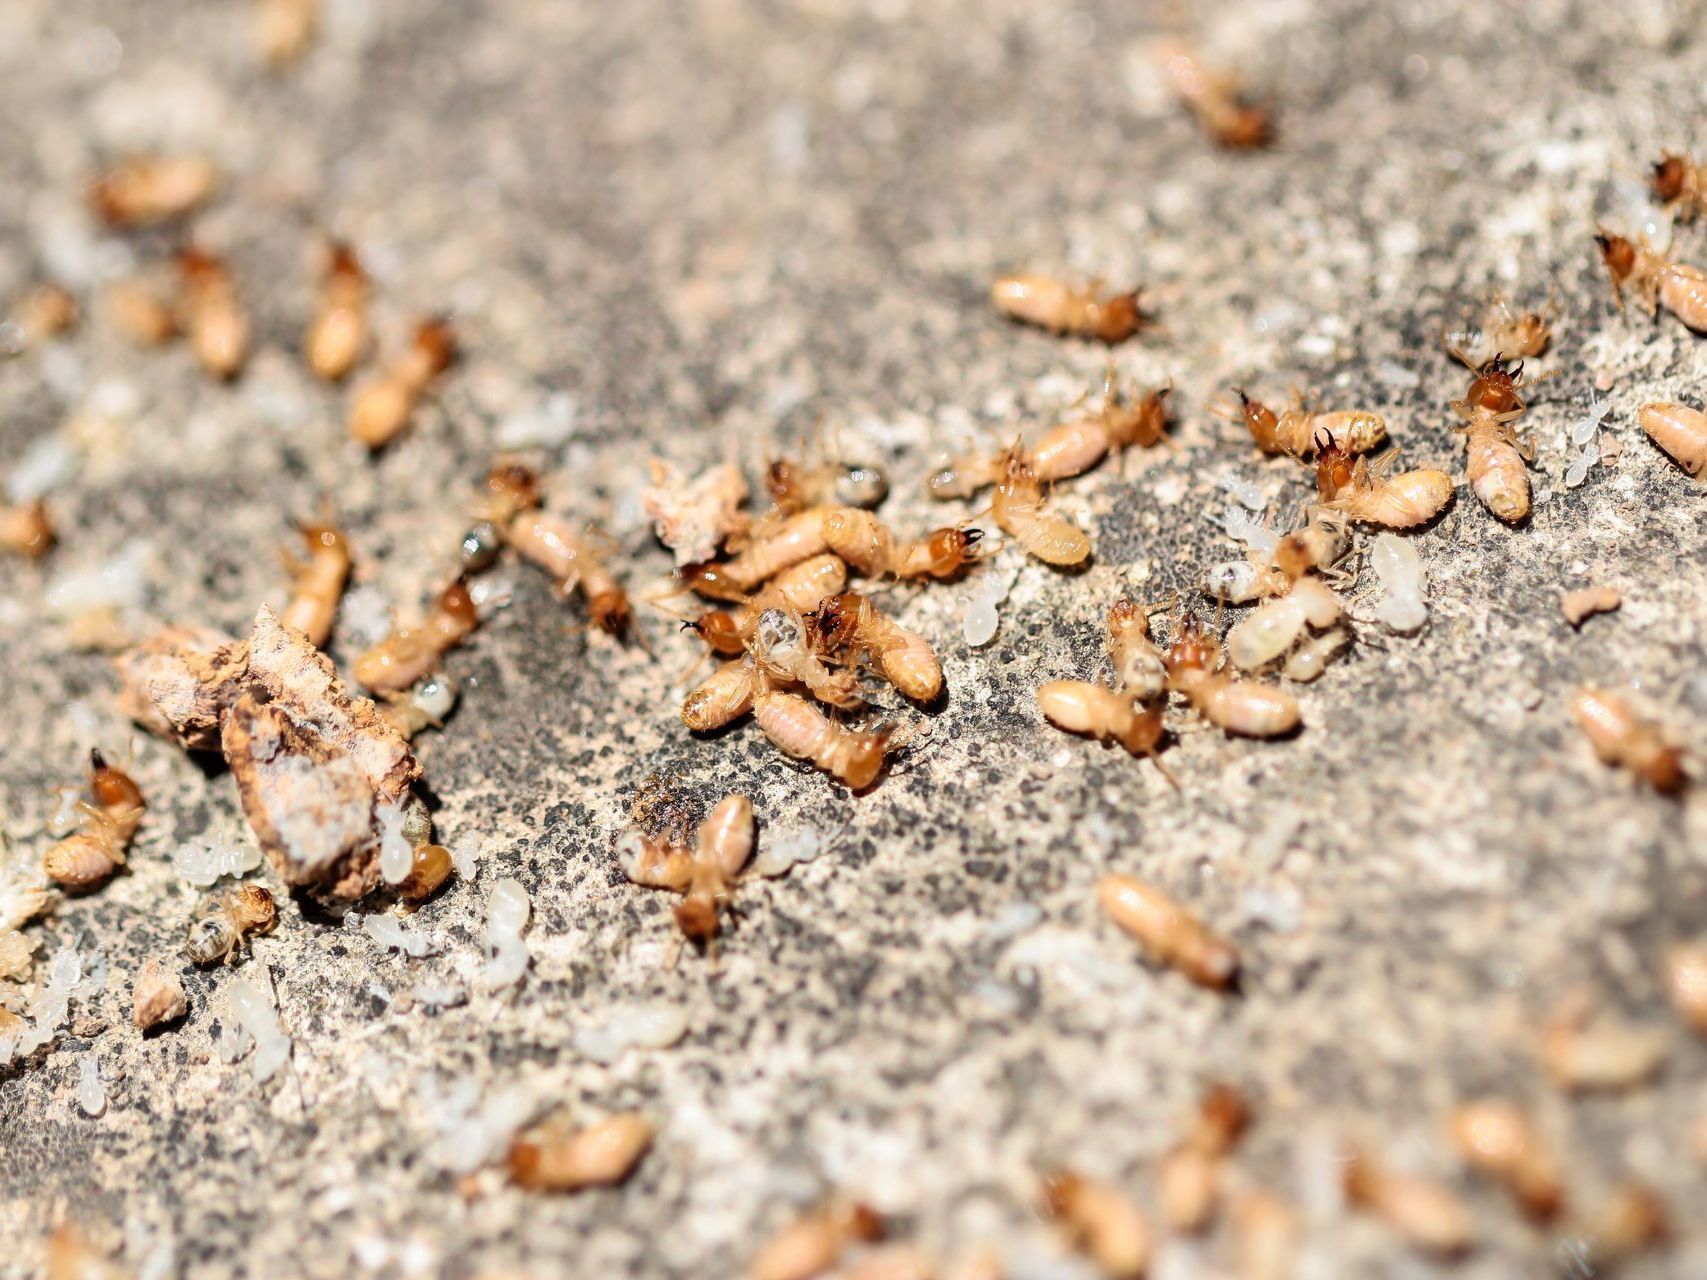 Dead termites on the ground. 